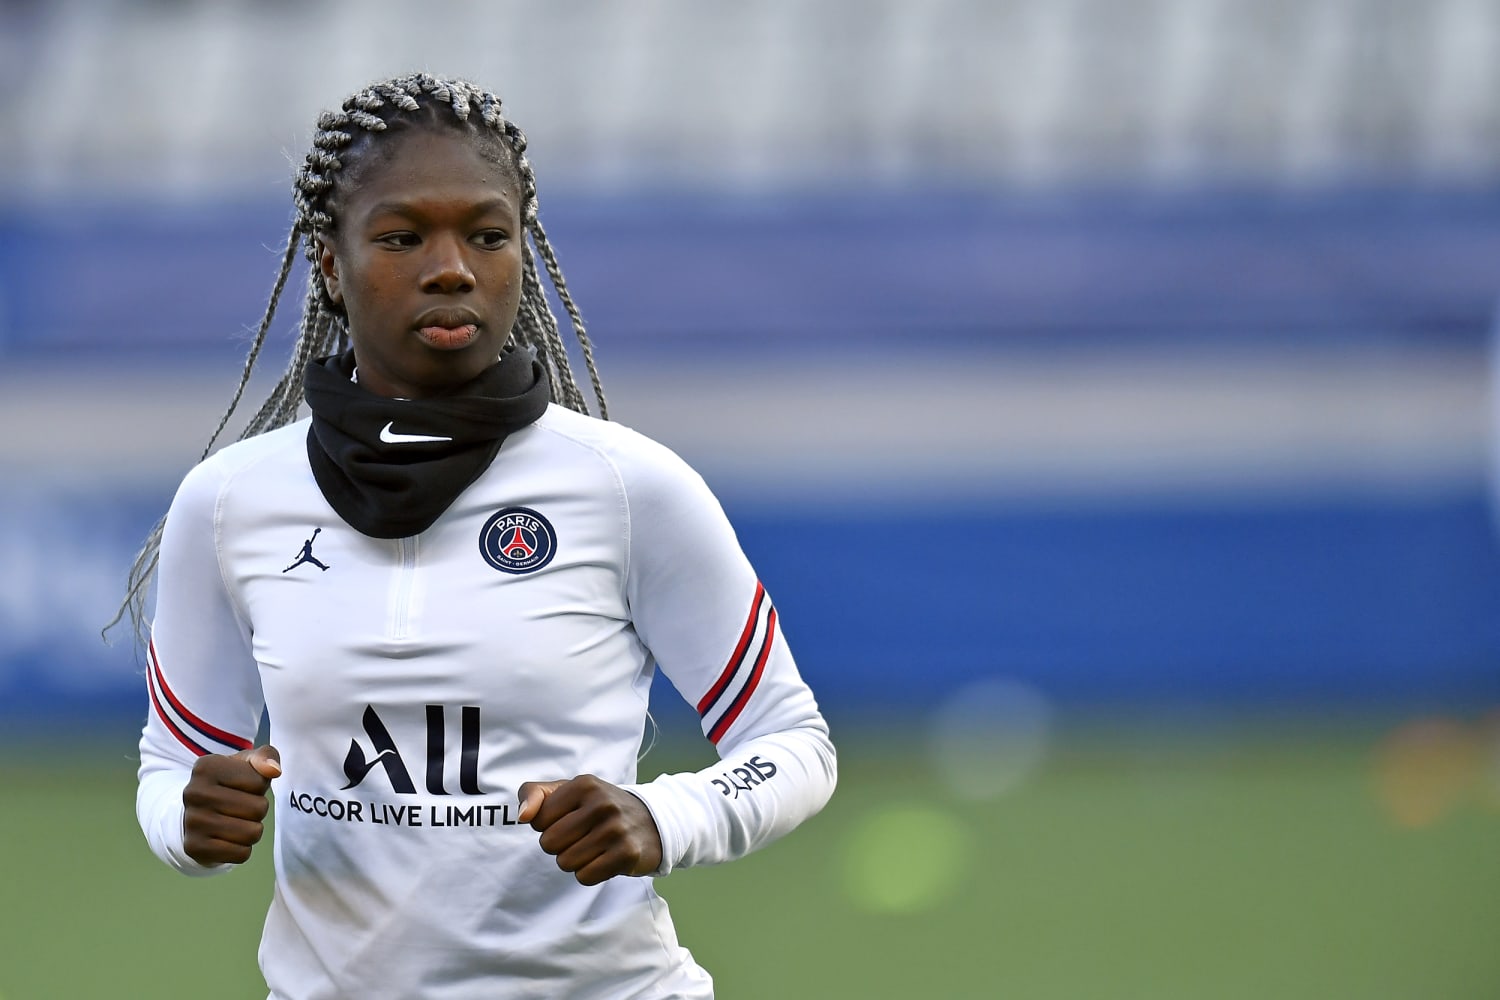 Paris Saint-Germain women’s soccer player arrested in attack on teammate